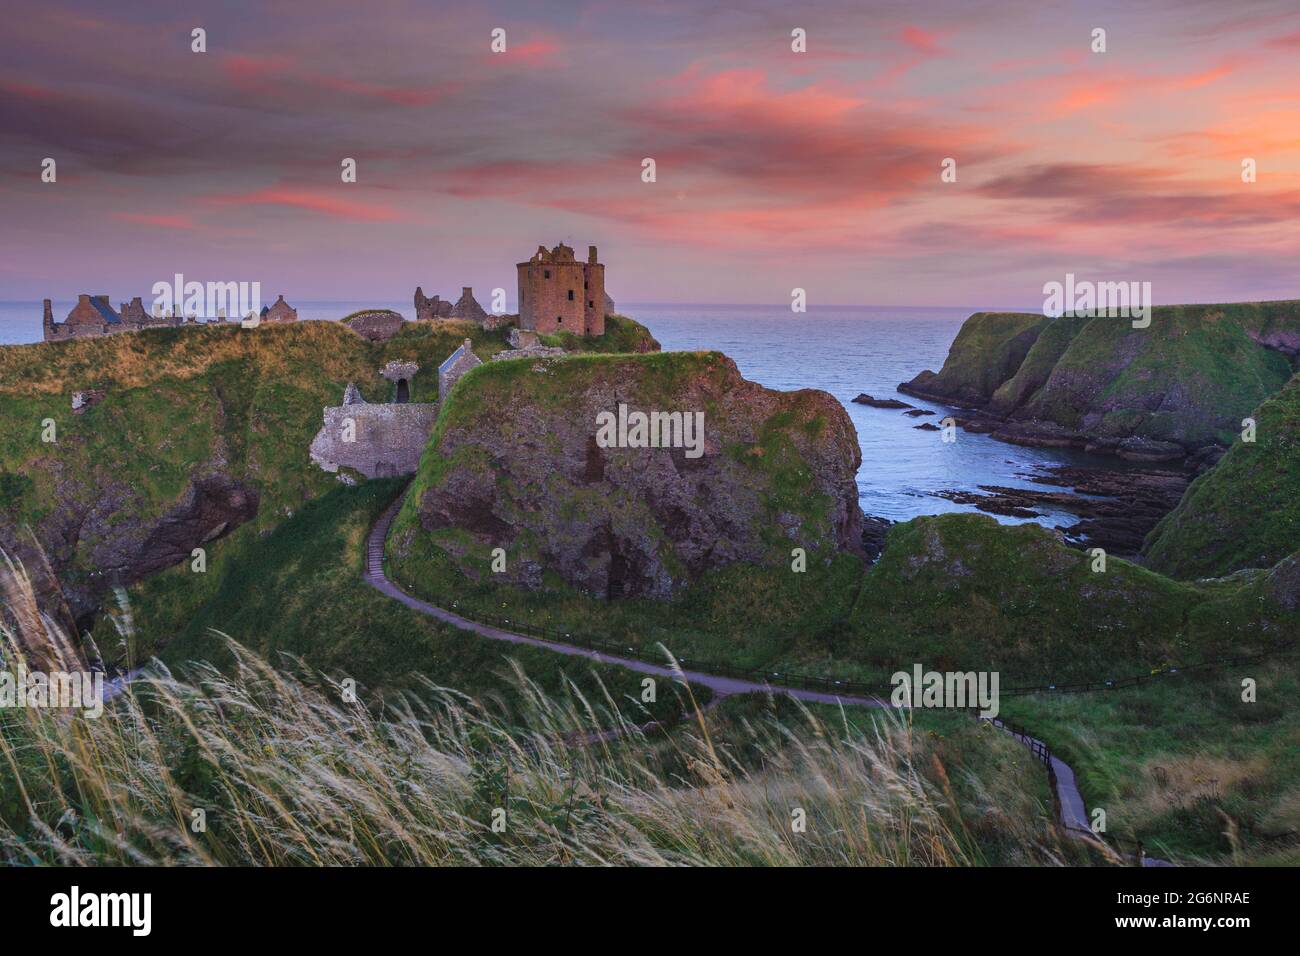 Ruins of Dunottar castle on a cliff, on the north east coast of Scotland, Stonehaven, Aberdeen, United Kingdom Stock Photo